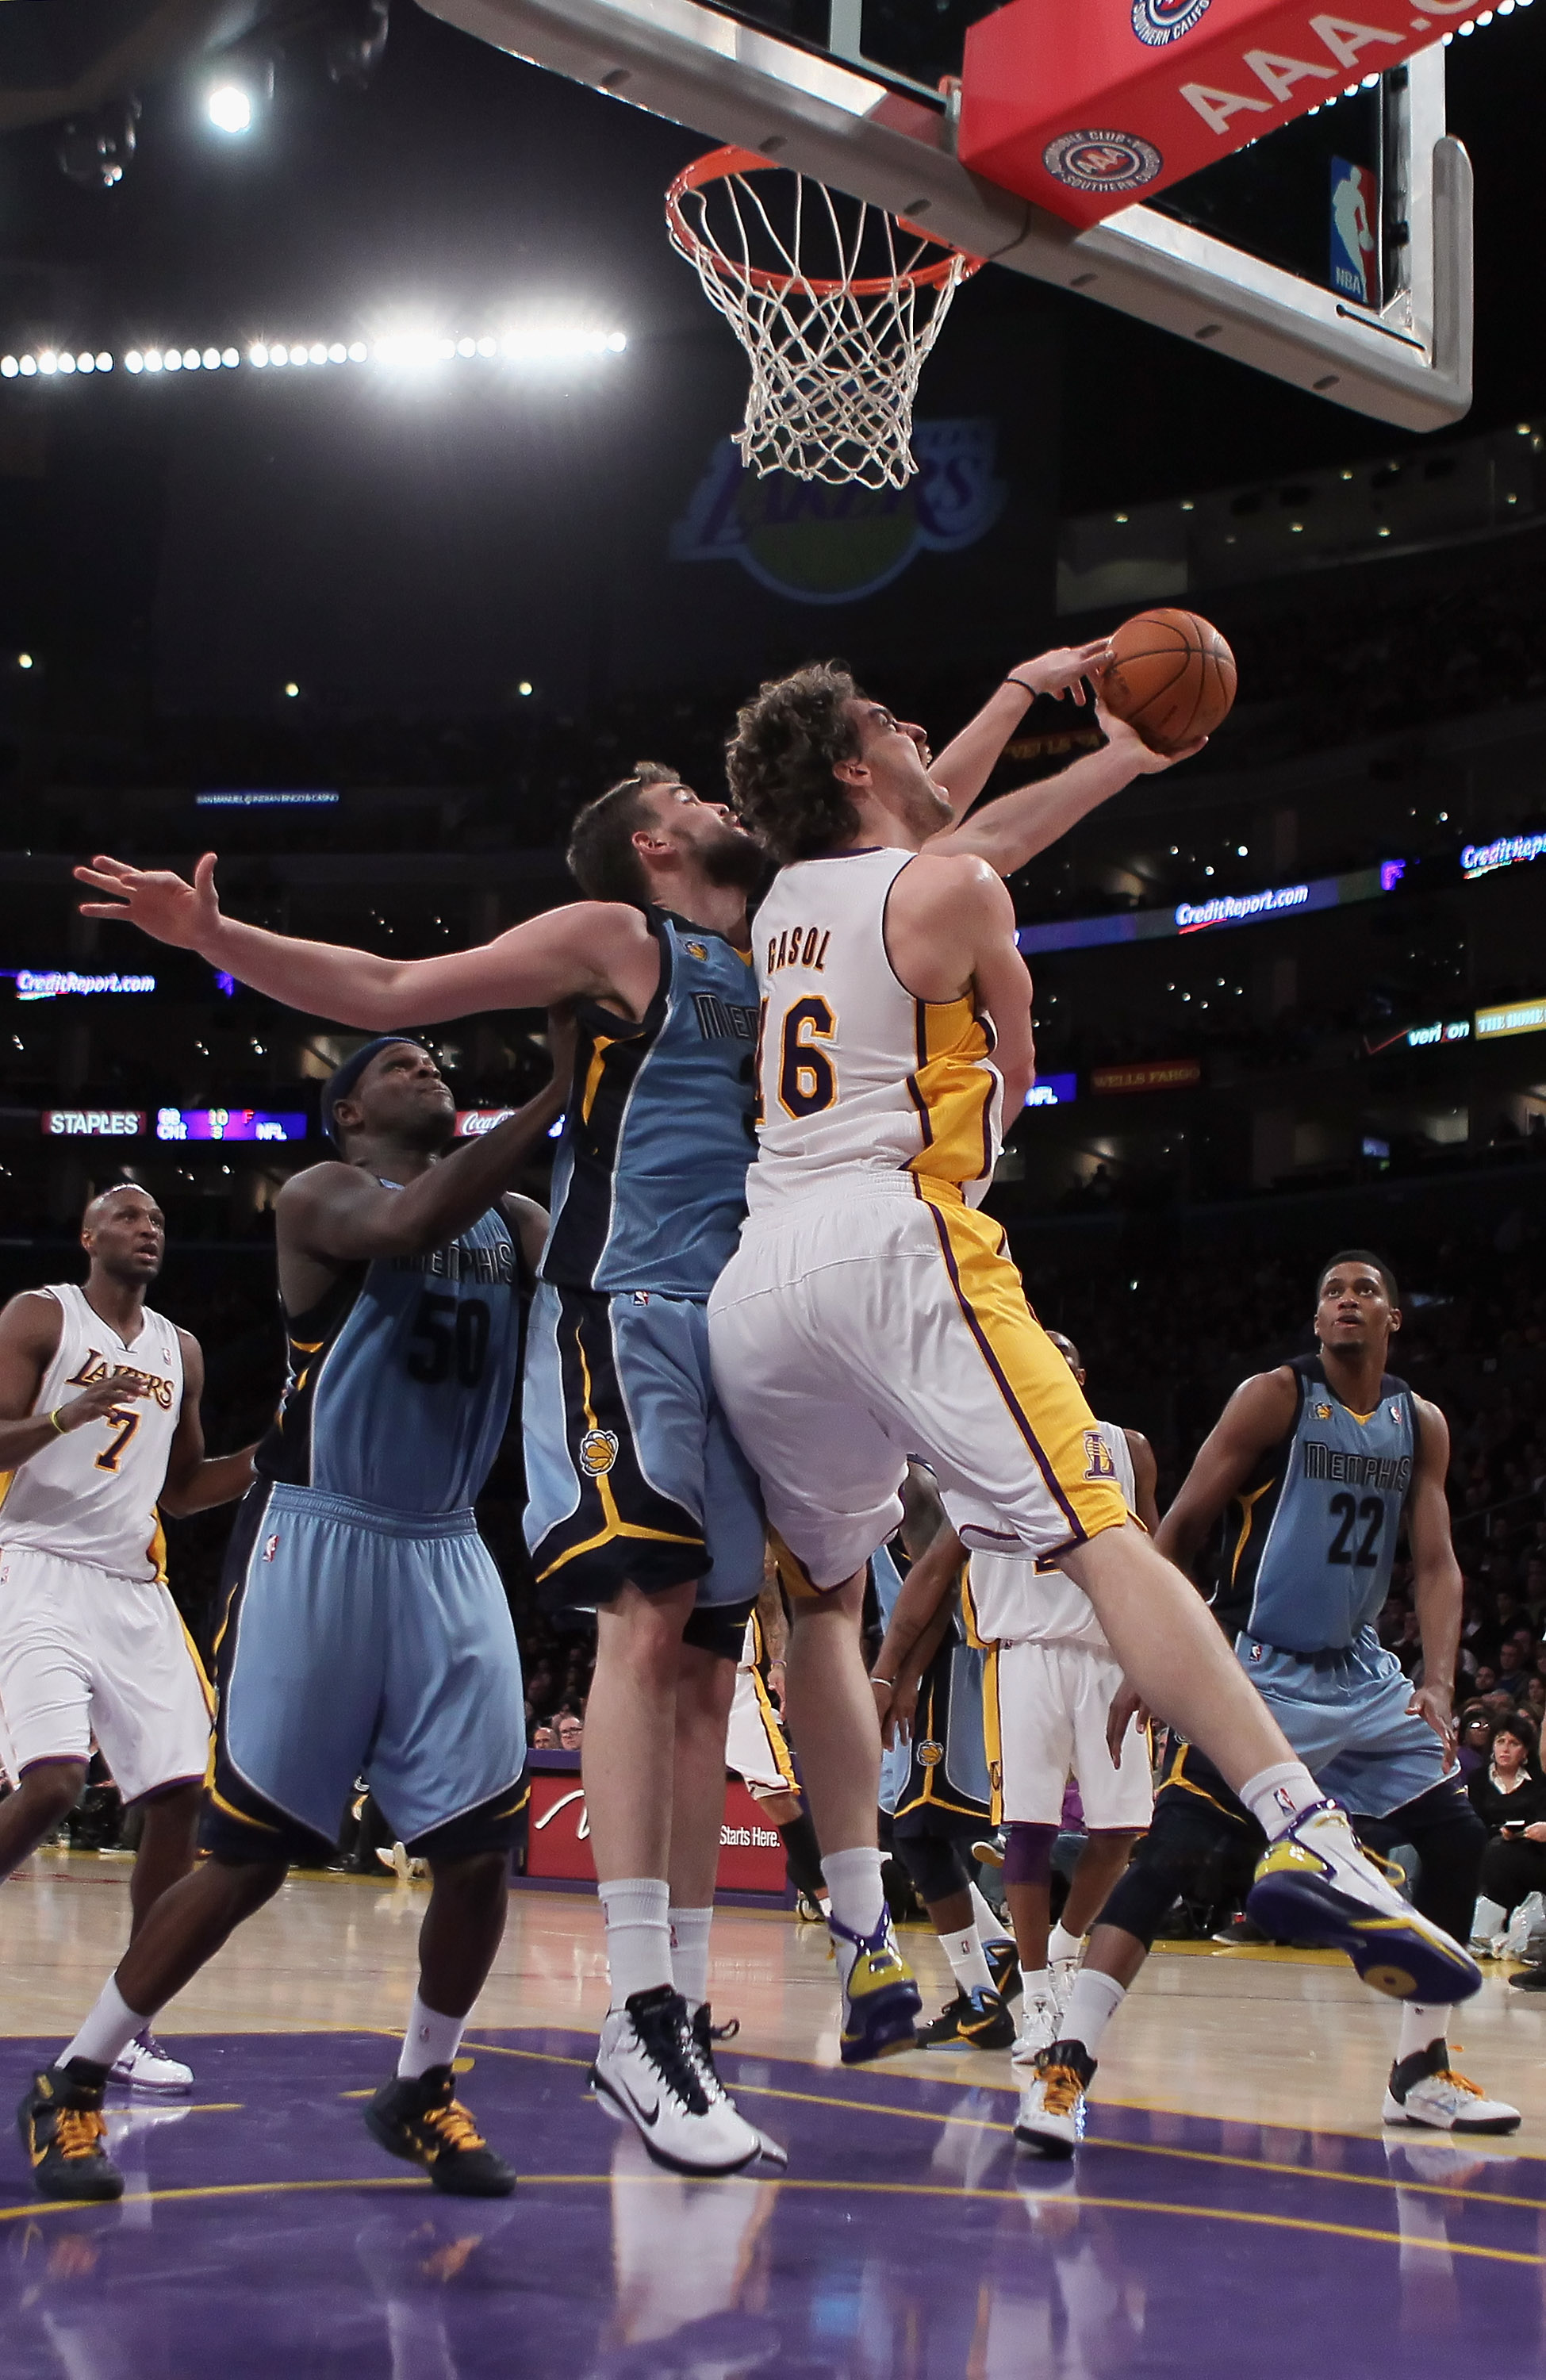 LOS ANGELES, CA - JANUARY 02:  Pau Gasol #16 of the Los Angeles Lakers is defended by Marc Gasol #33 of the Memphis Grizzlies during the second half at Staples Center on January 2, 2011 in Los Angeles, California. The Grizzlies defeated the Lakers 104-85.